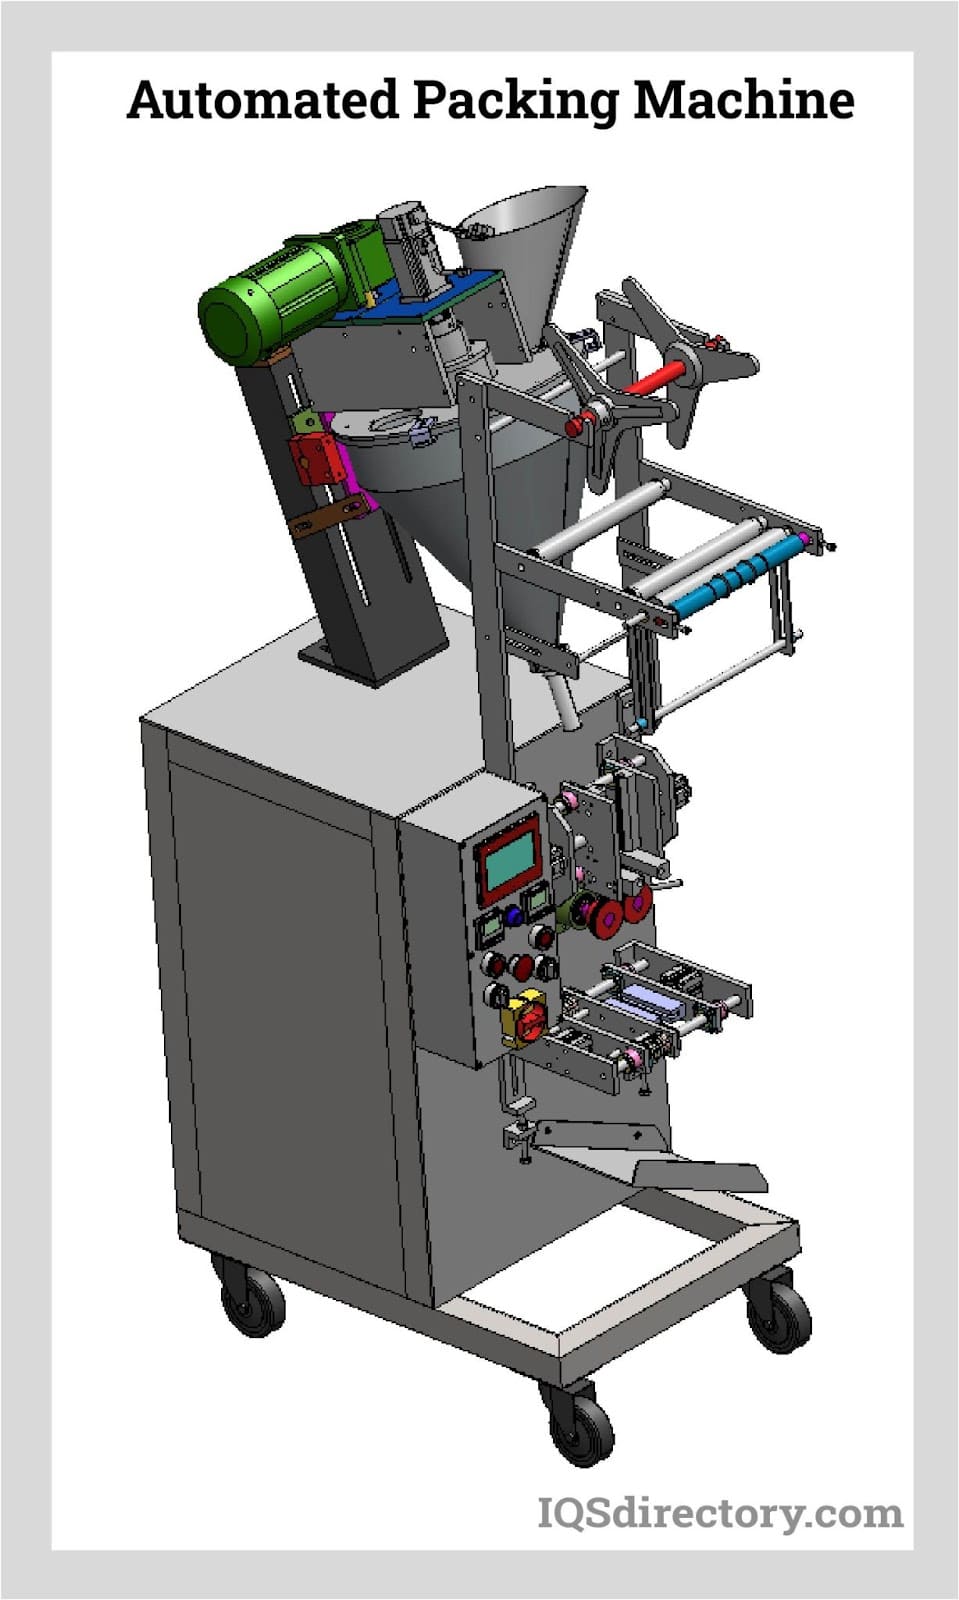 Packaging Equipment and Machines